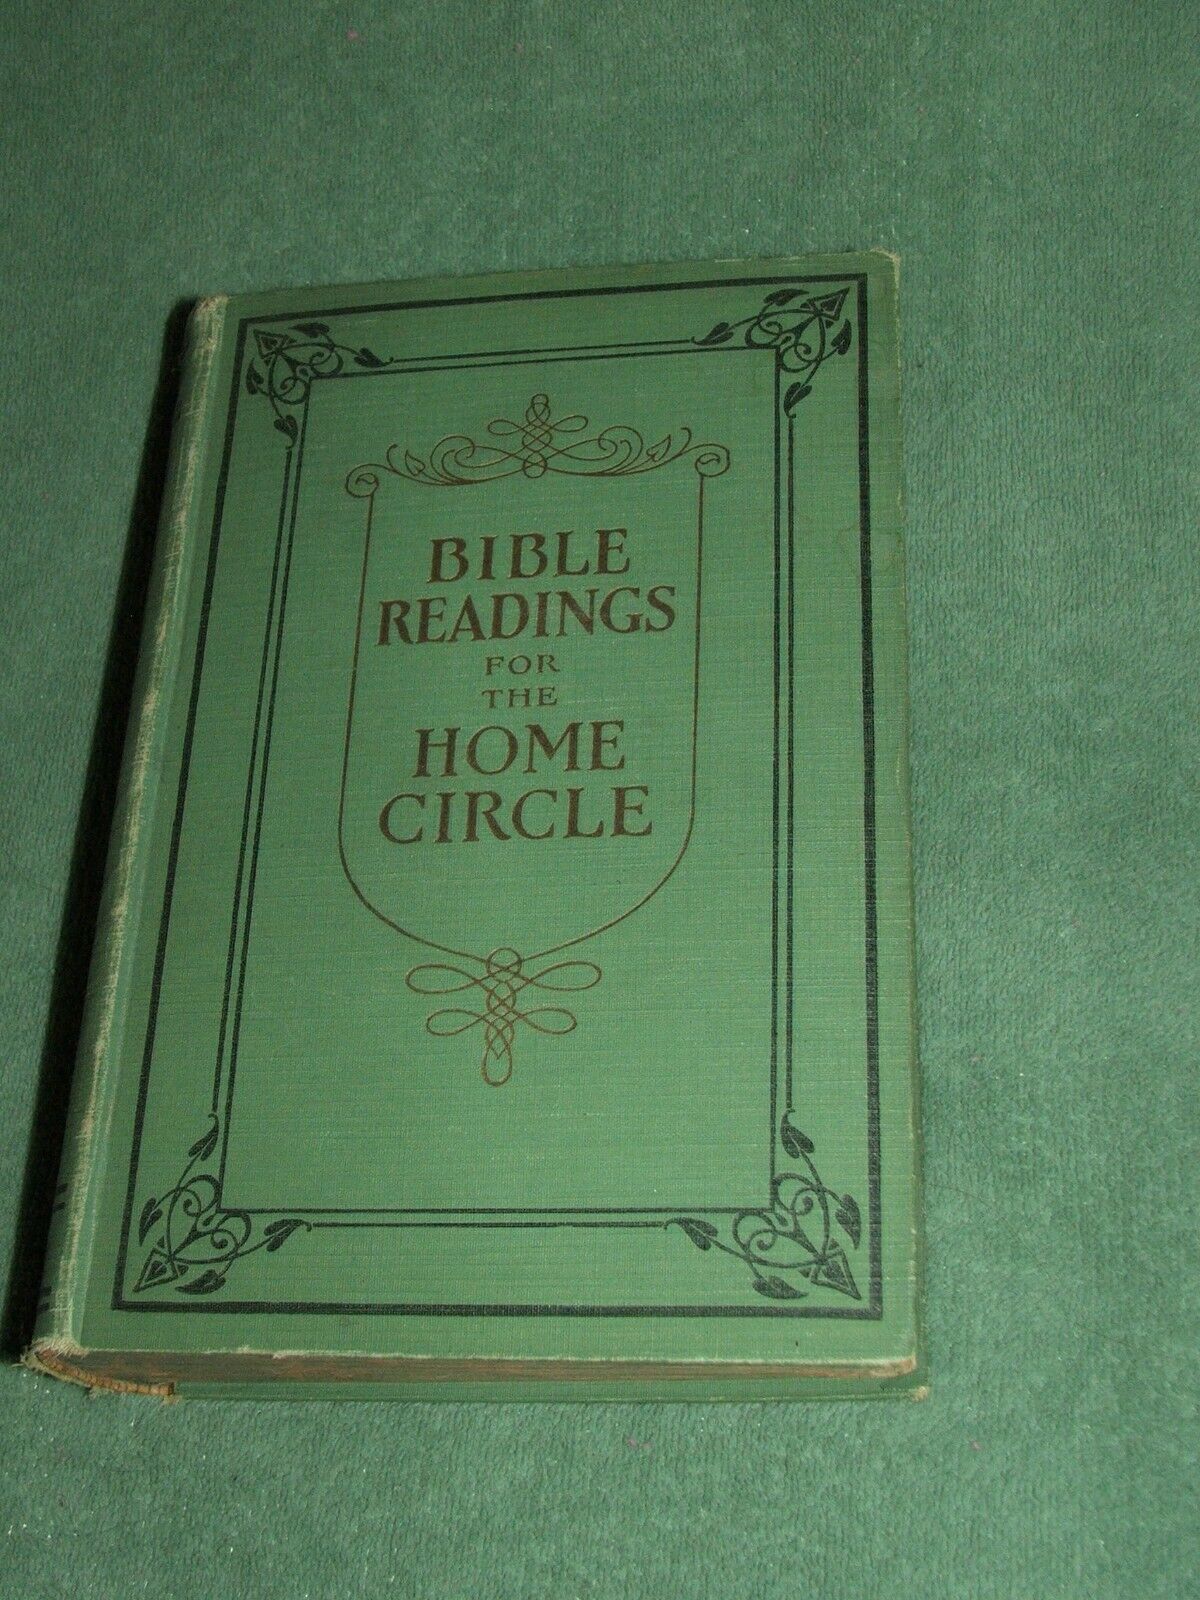 BIBLE READINGS FOR THE HOME CIRCLE 1916 ANTIQUE ILLUSTRATED RELIGIOUS BOOK